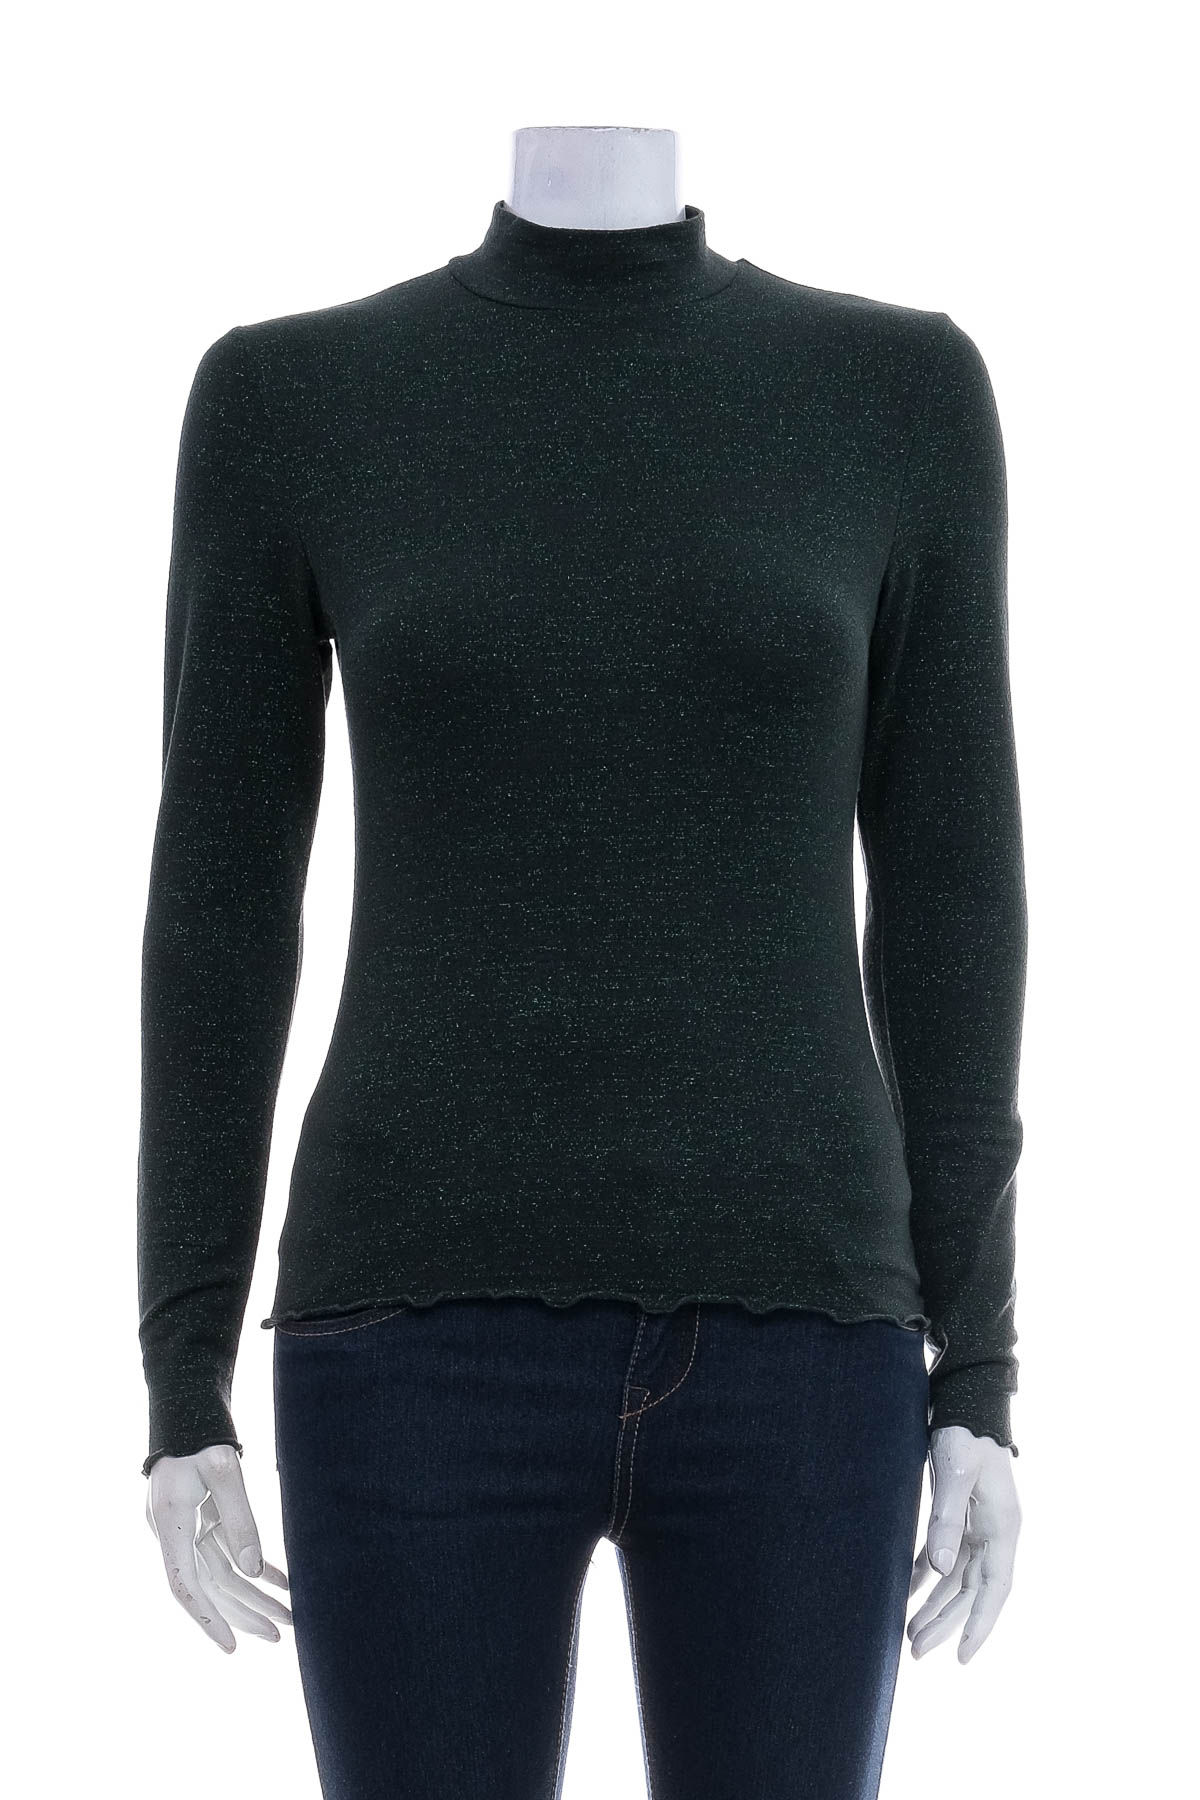 Women's sweater - PIGALLE - 0